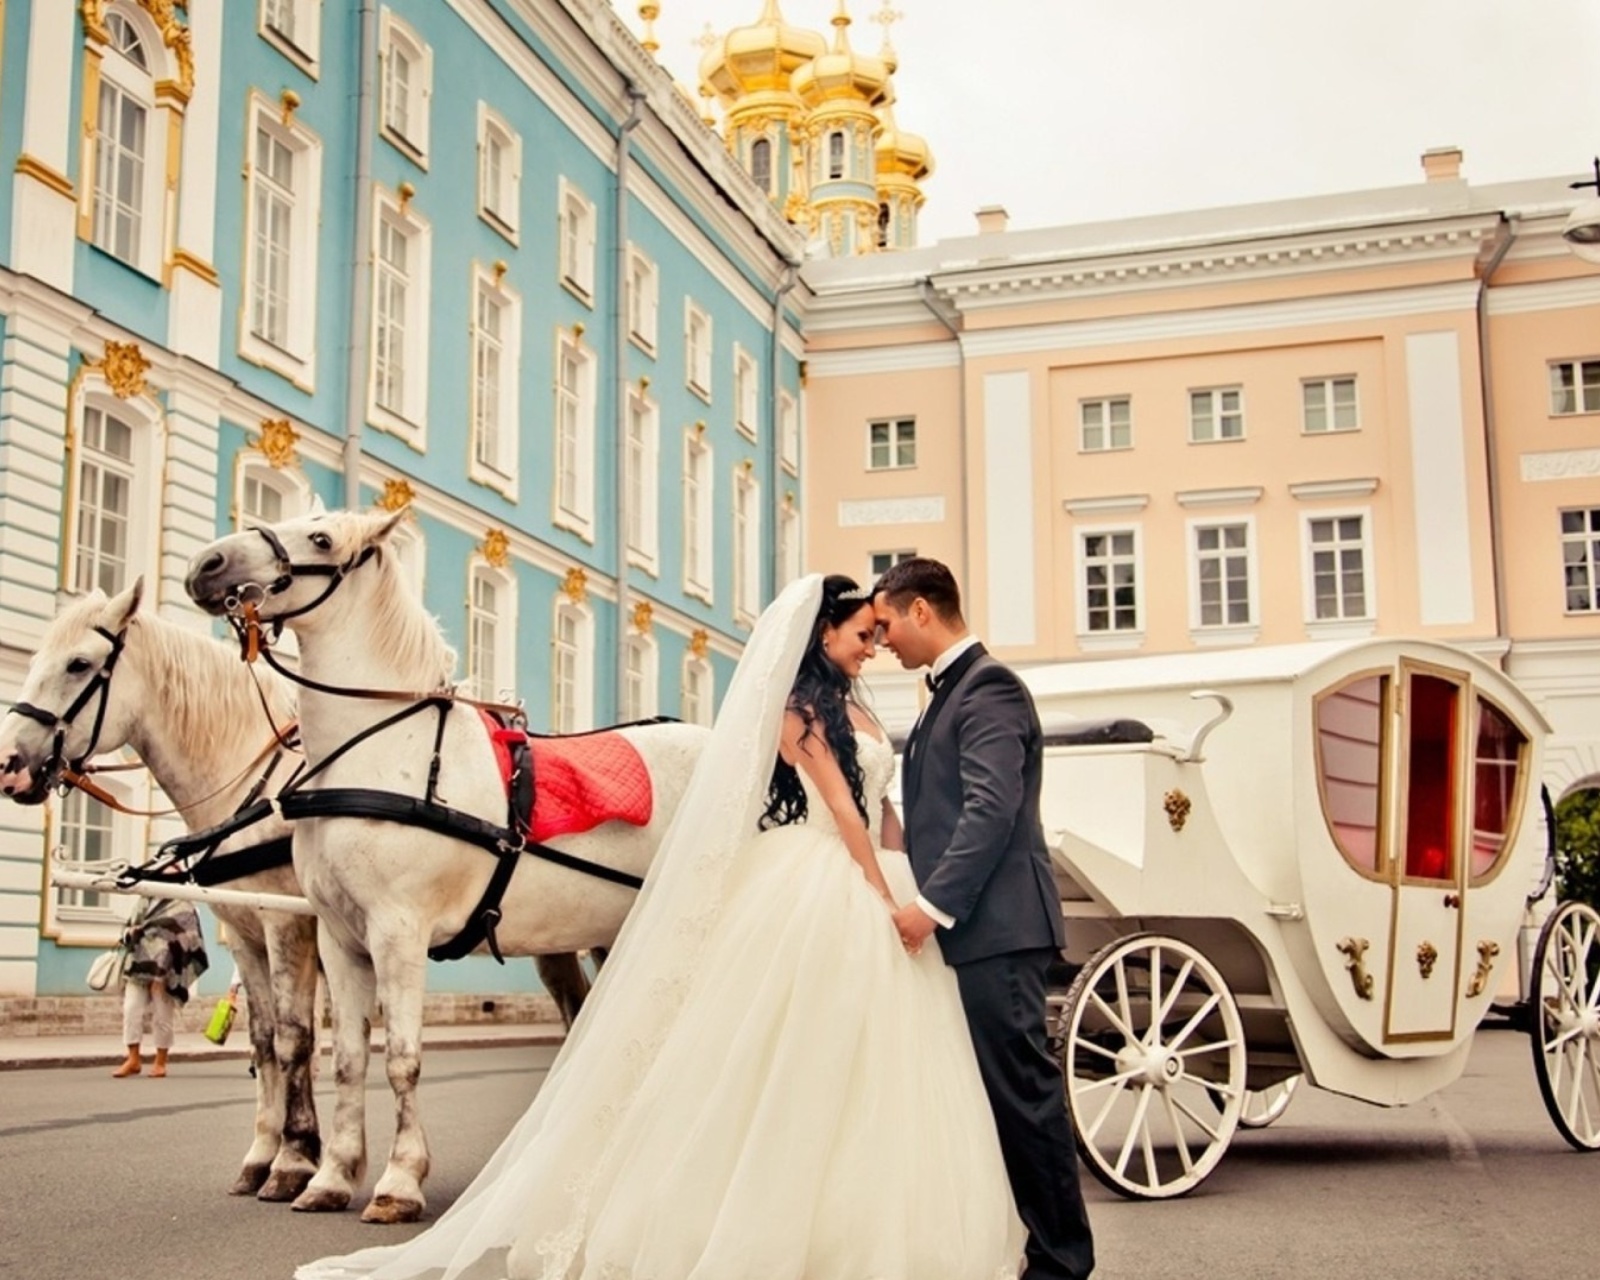 Wedding in carriage wallpaper 1600x1280